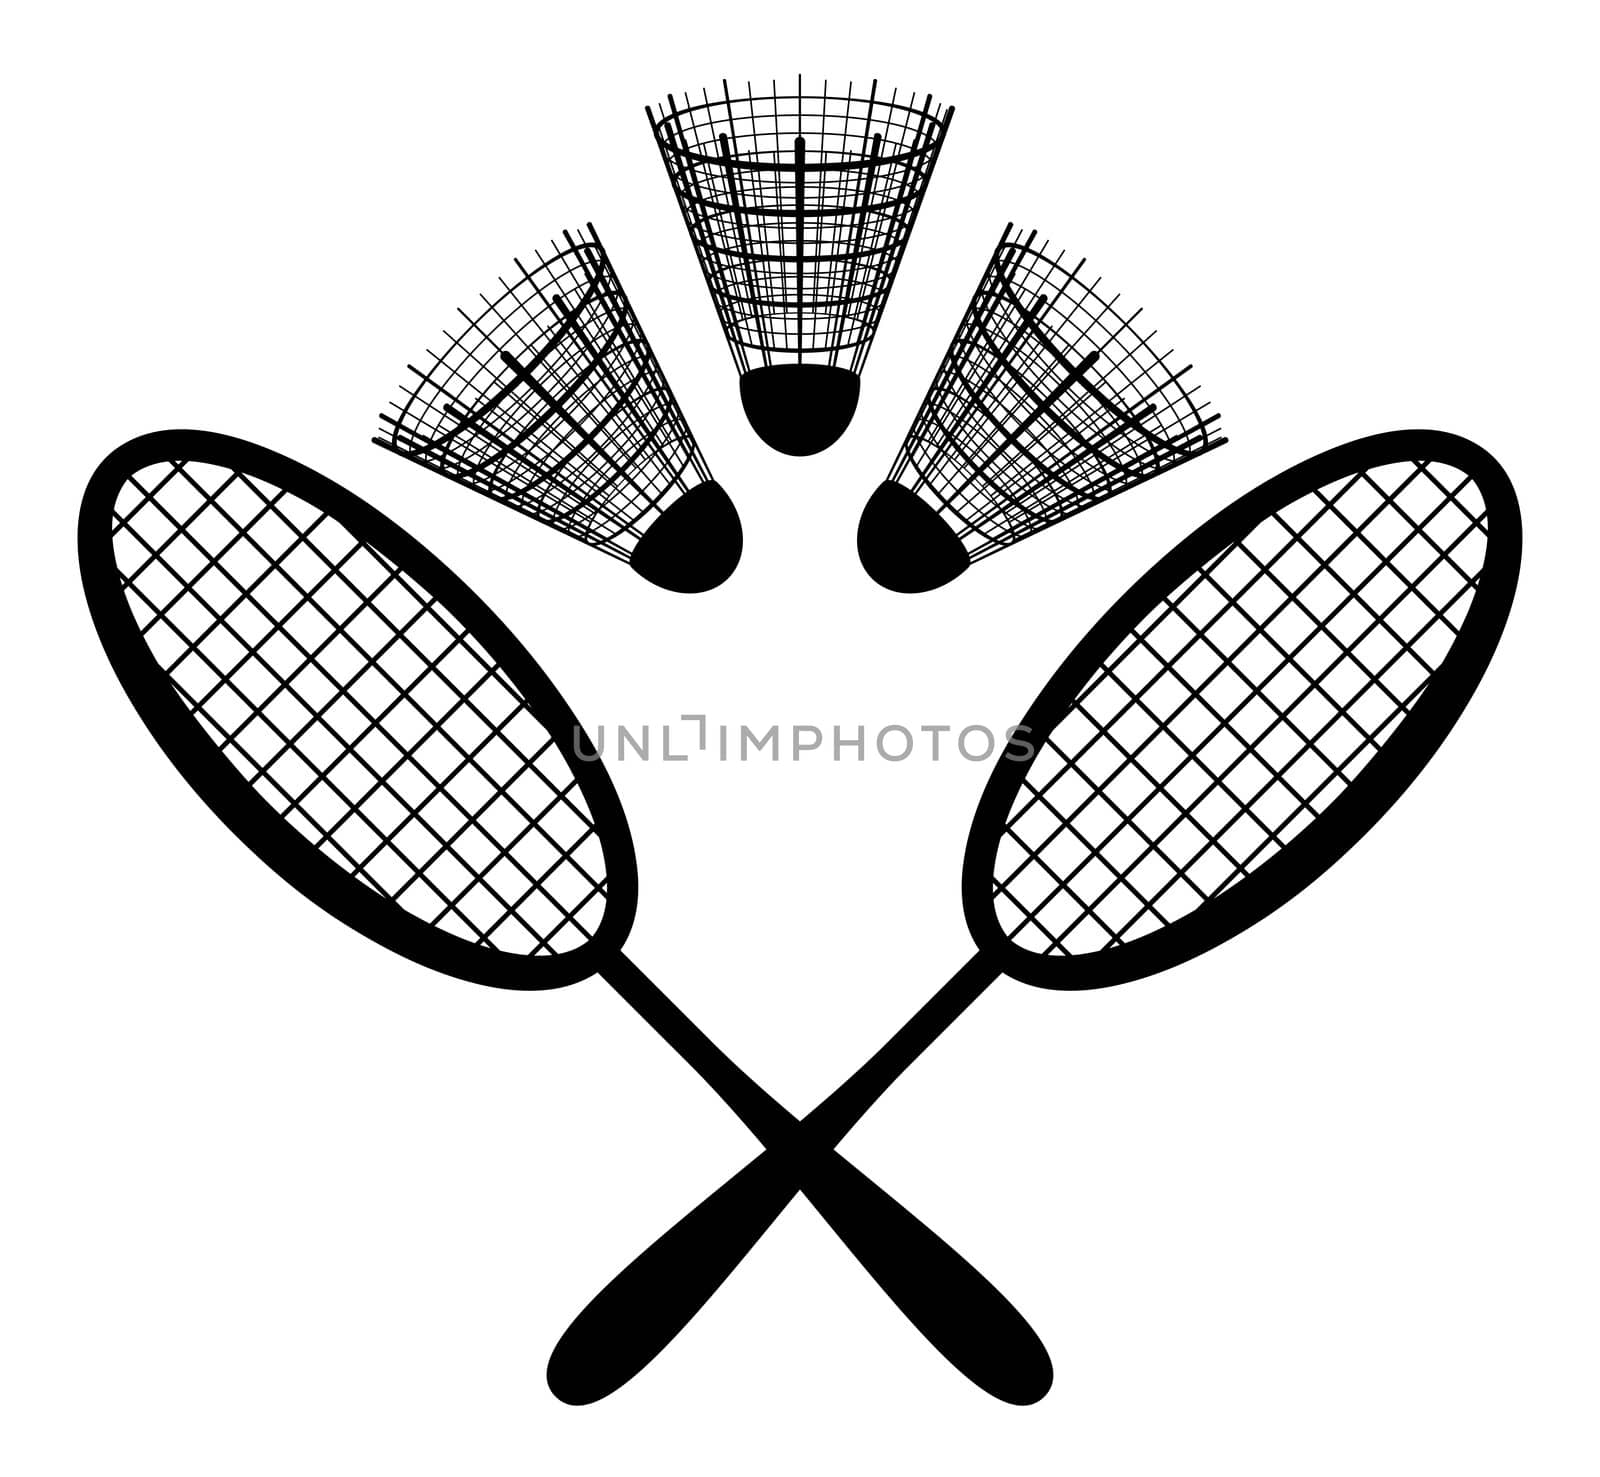 Equipment for the badminton, silhouette by alexcoolok